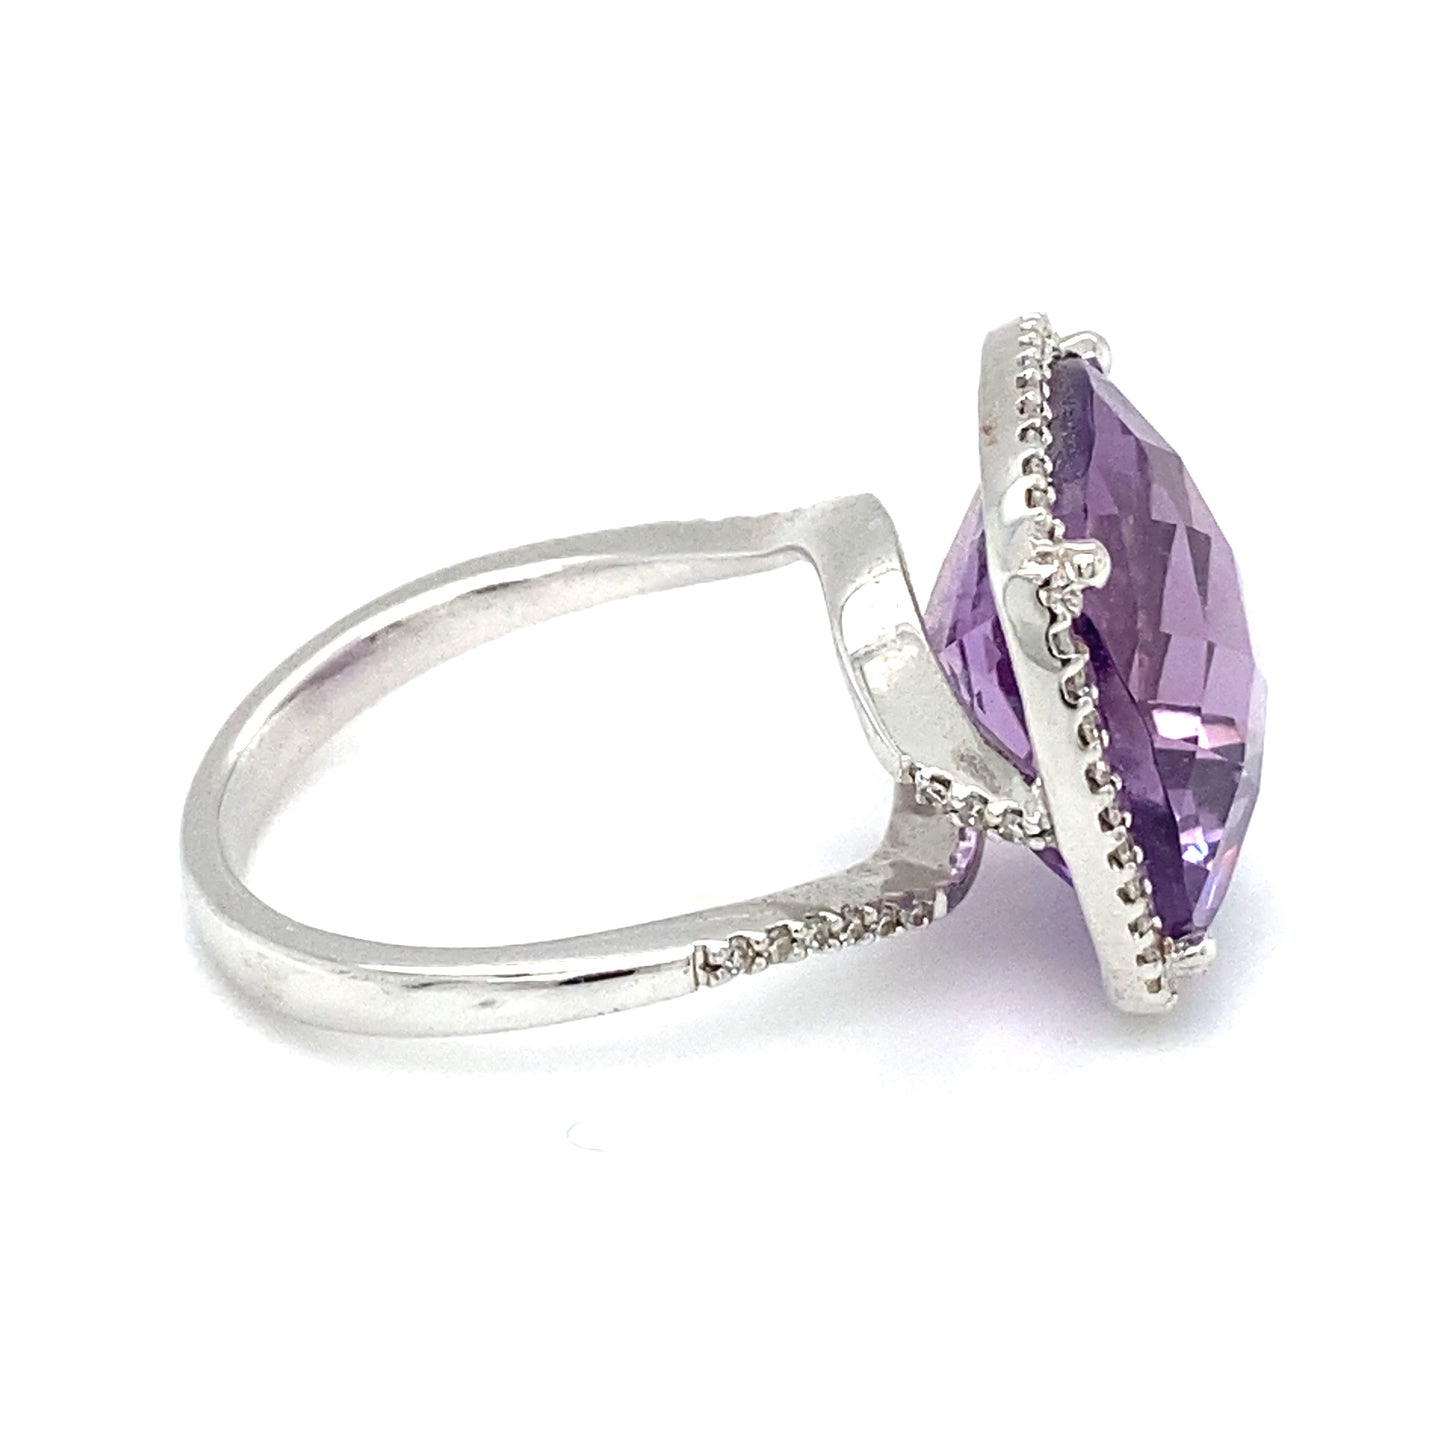 Circa 2000s 8.0ct Amethyst and Diamond Cocktail Ring in 14K White Gold